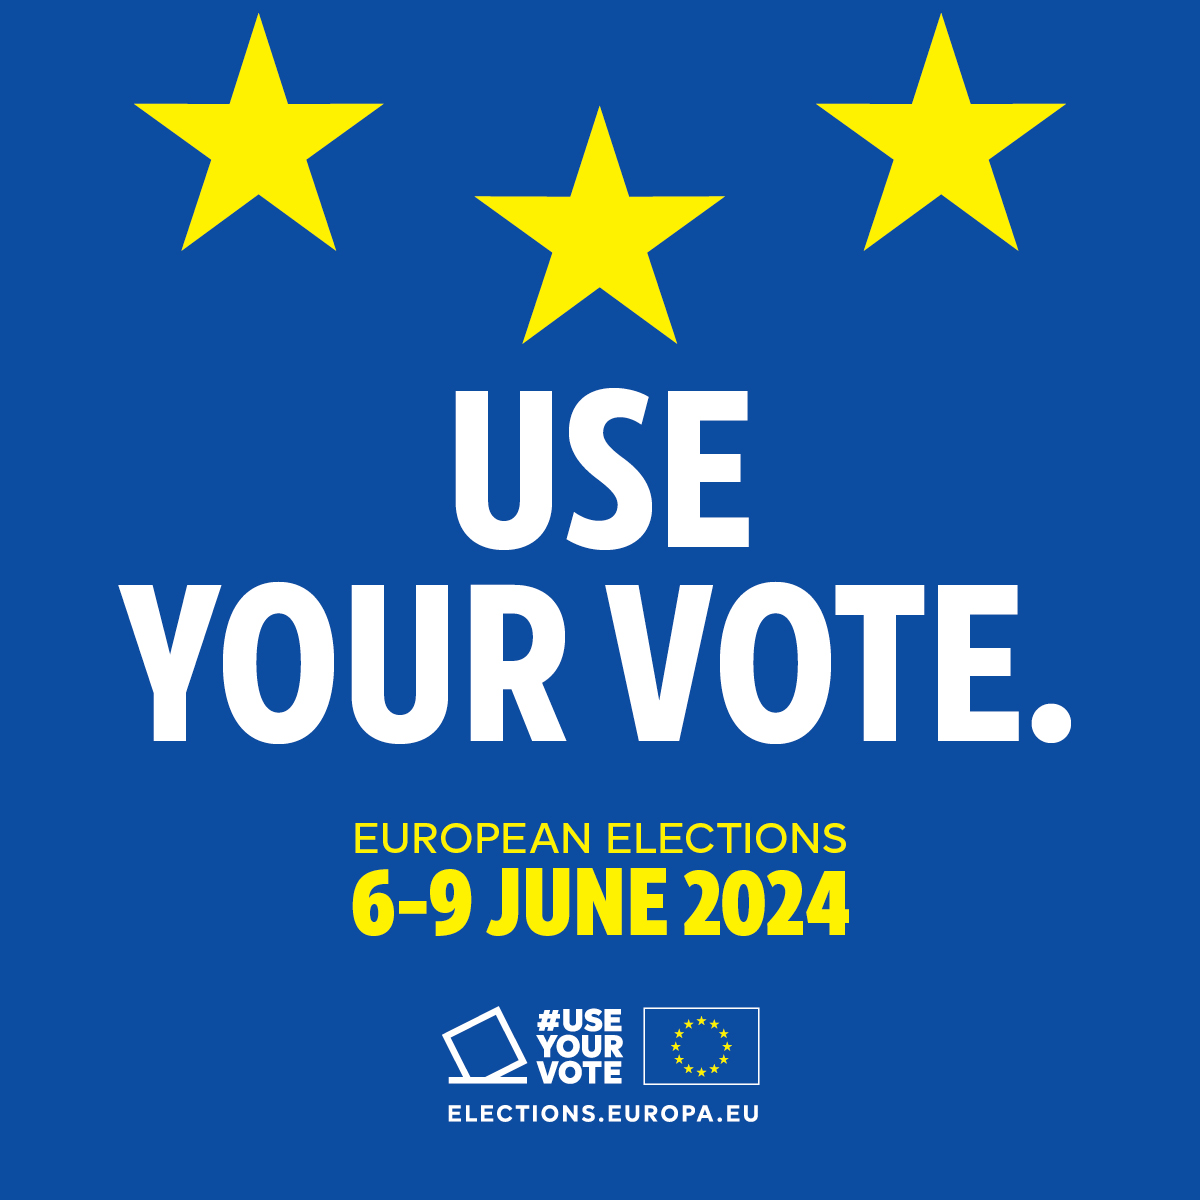 We put it on X so you can put it in your calendar! Even if you're an expat, you can still participate in shaping the future of European #democracy during #EUelections2024. Don't miss this opportunity to make a difference. Details: bit.ly/4buL9Xc @EPWashingtonDC